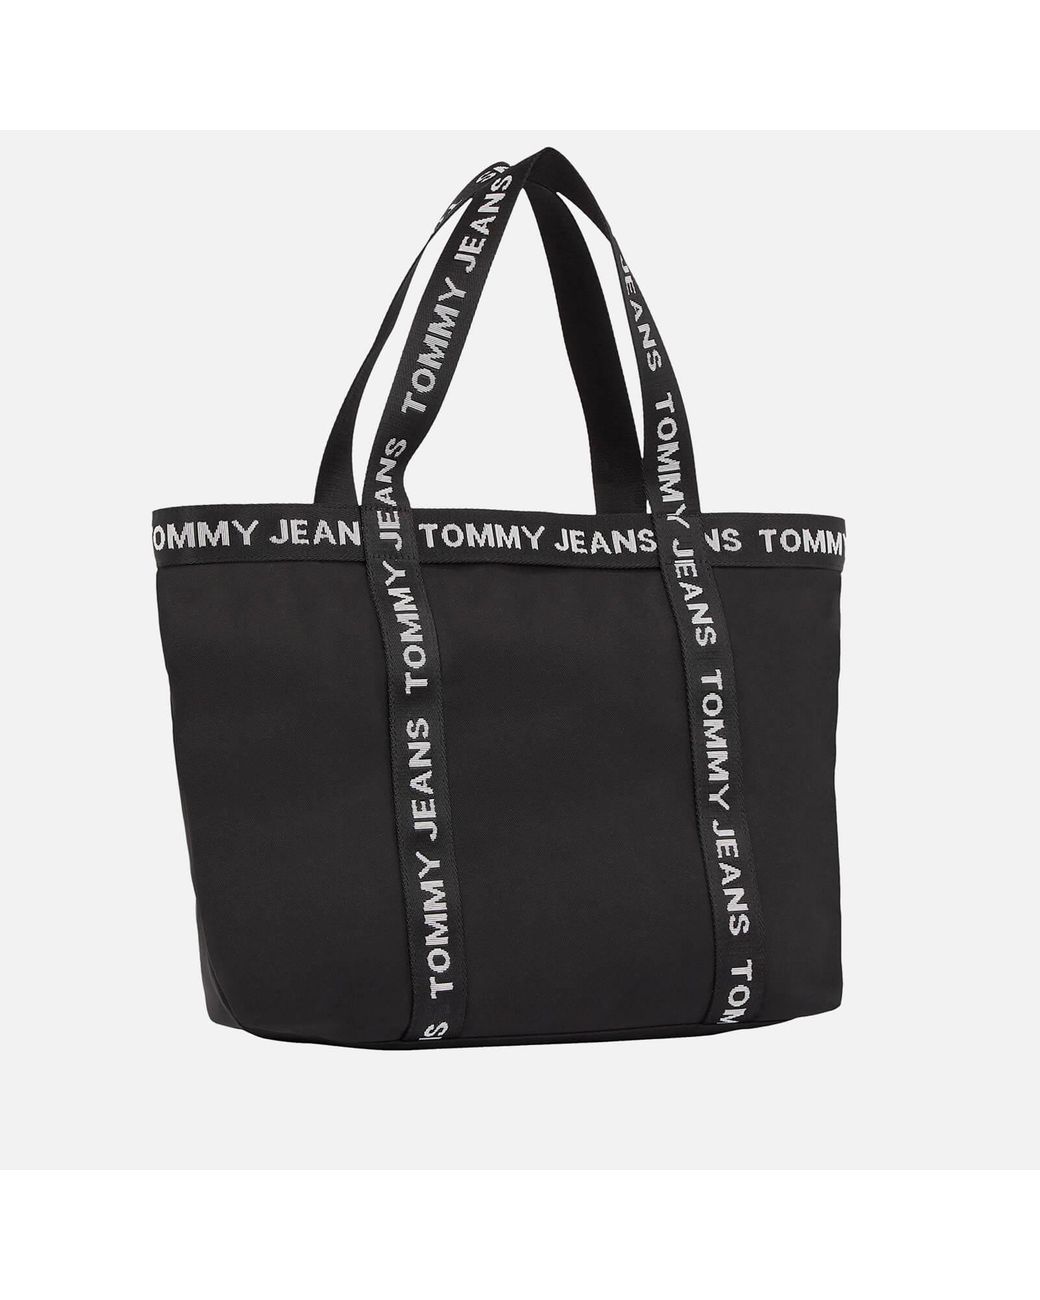 Tommy Hilfiger Essential Canvas Tote Bag in Black | Lyst